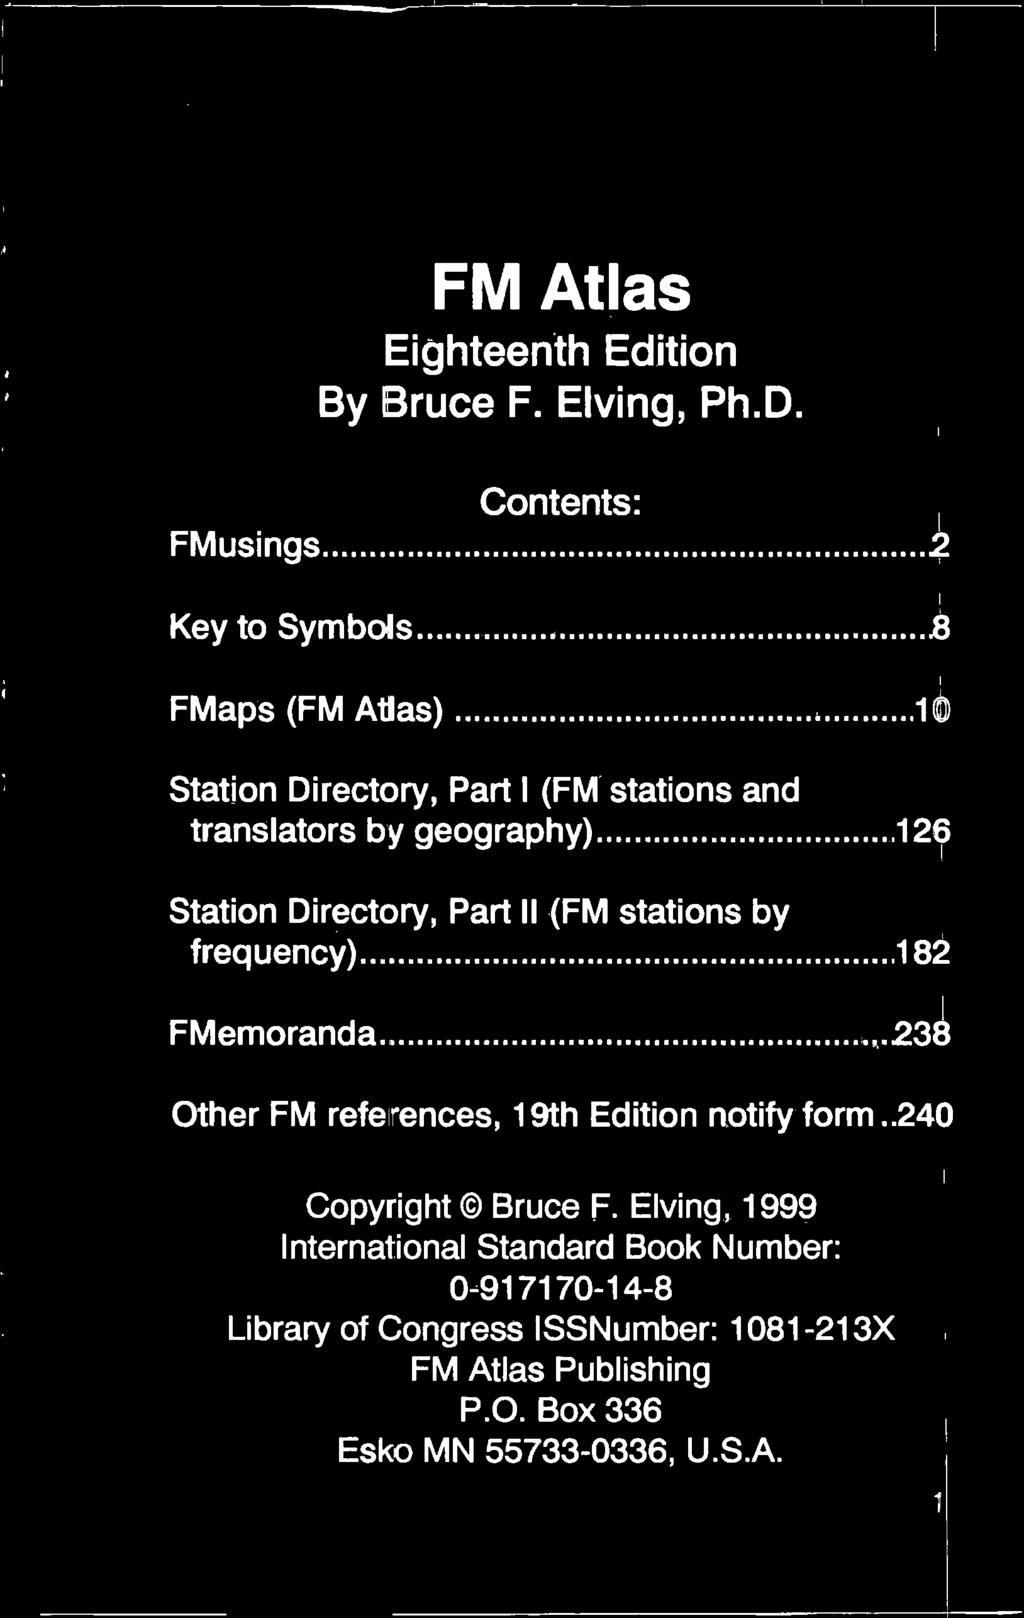 FM Atlas Eighteenth Edition By Bruce F. Elving, Ph.D. Contents: FMusings 2 Key to Symbols.